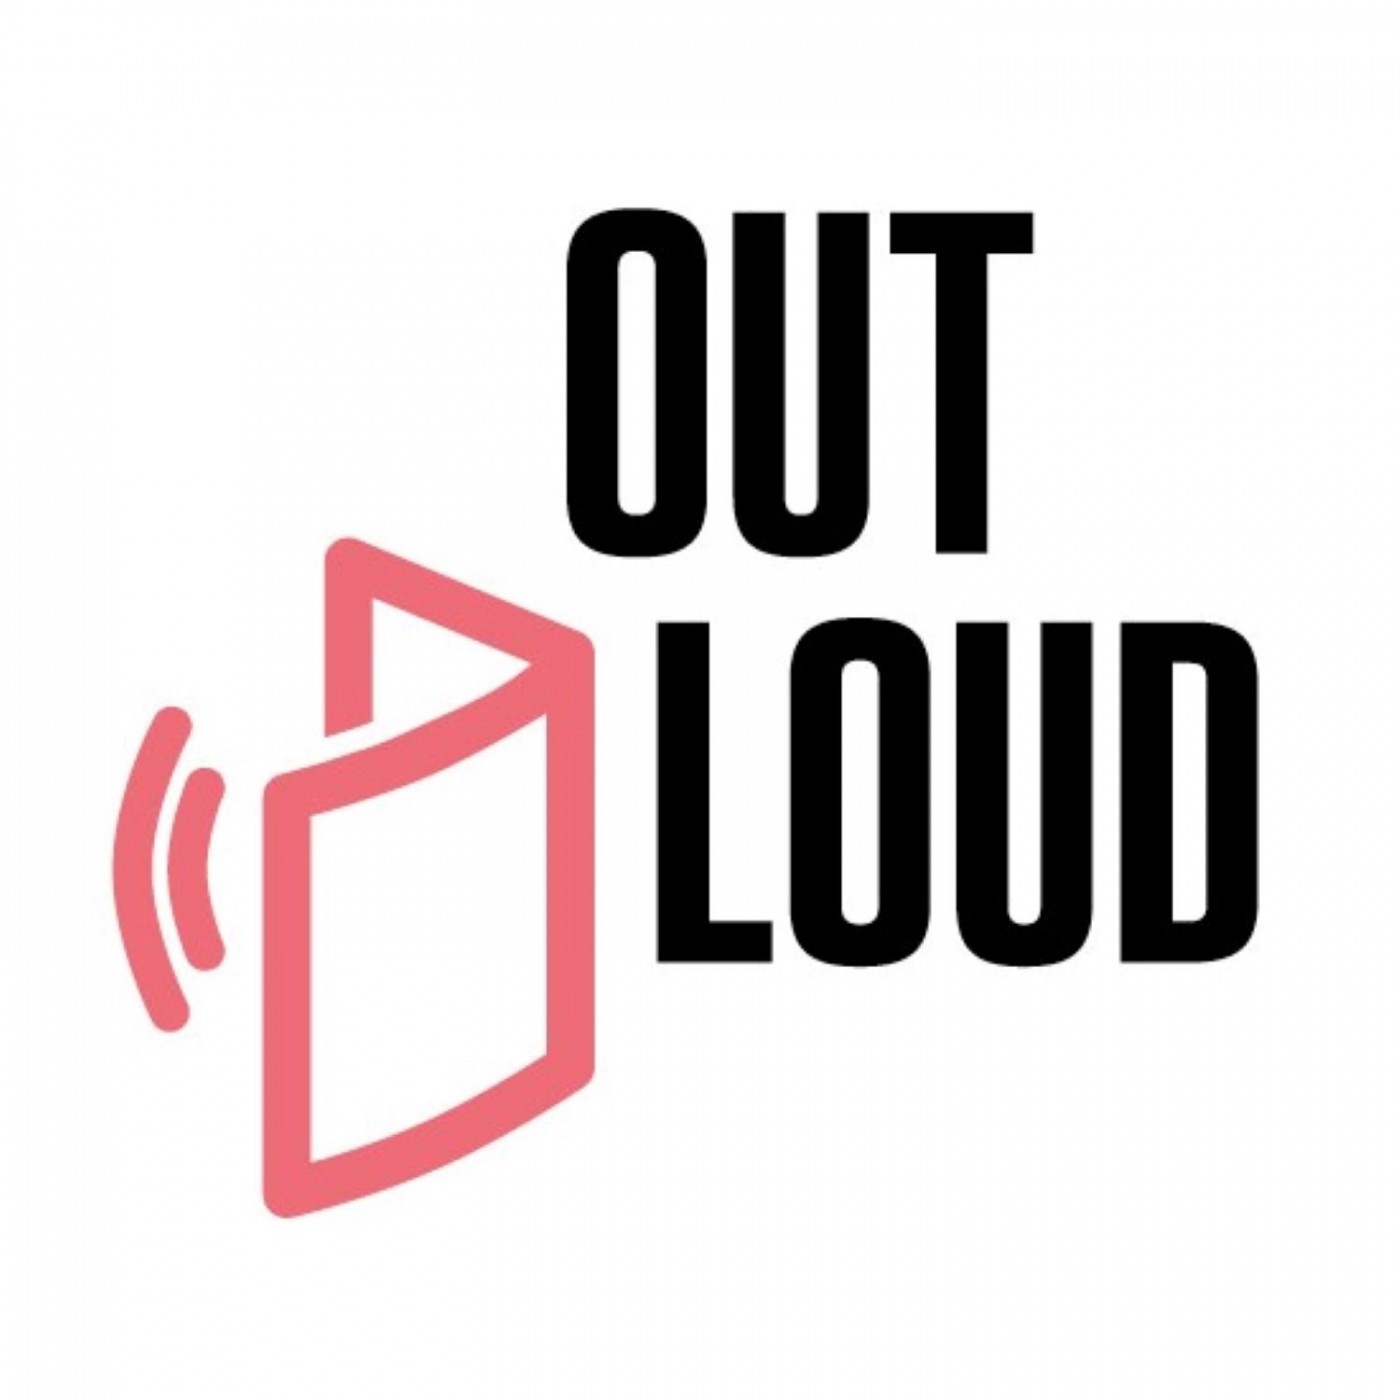 OUT LOUD